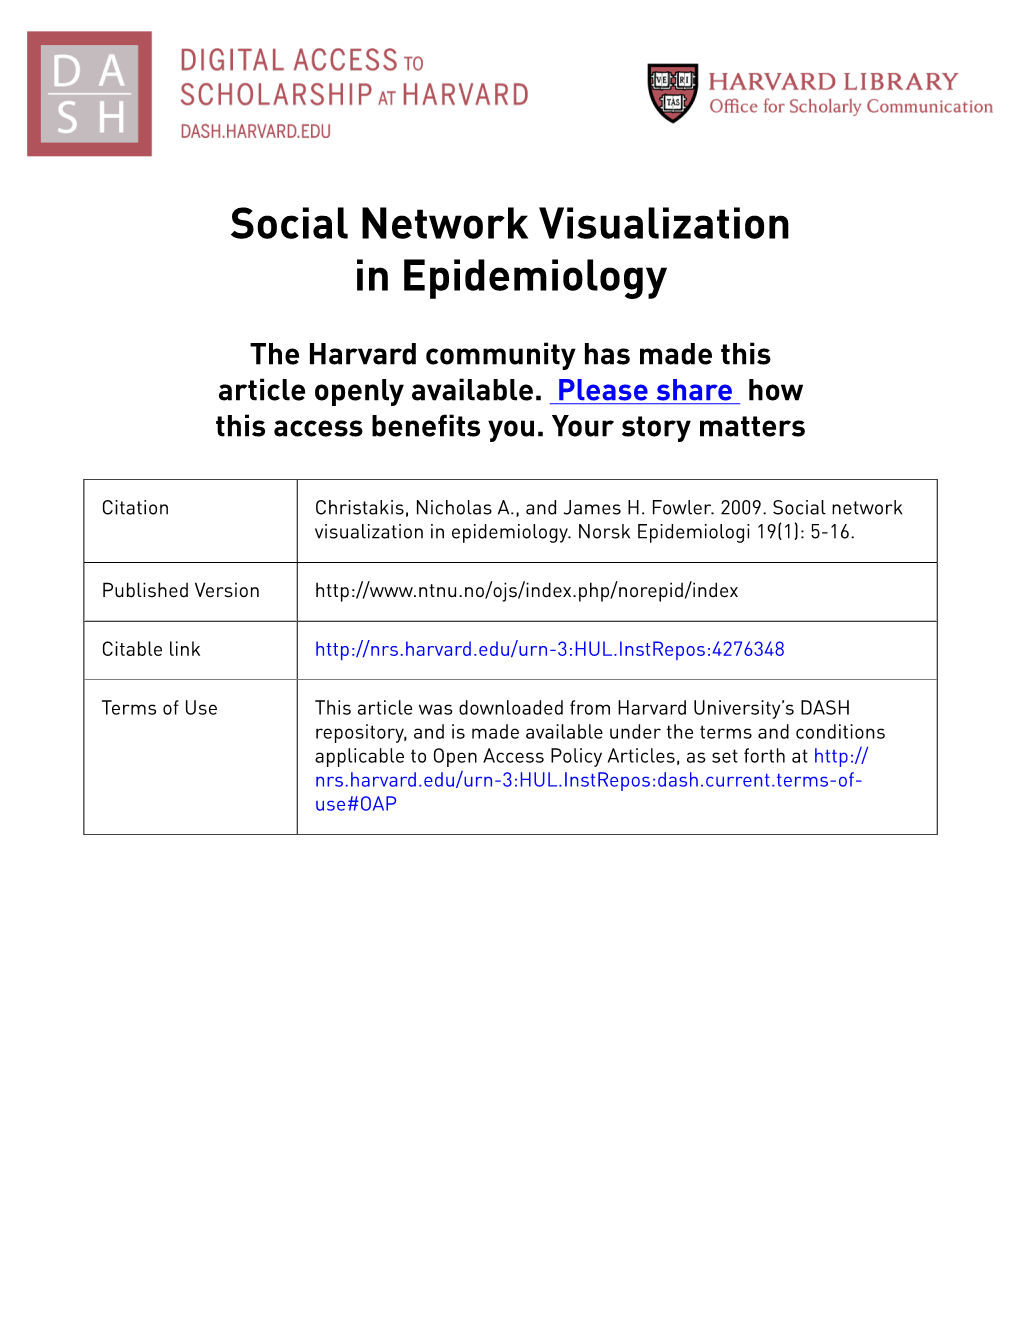 Social Network Visualization in Epidemiology